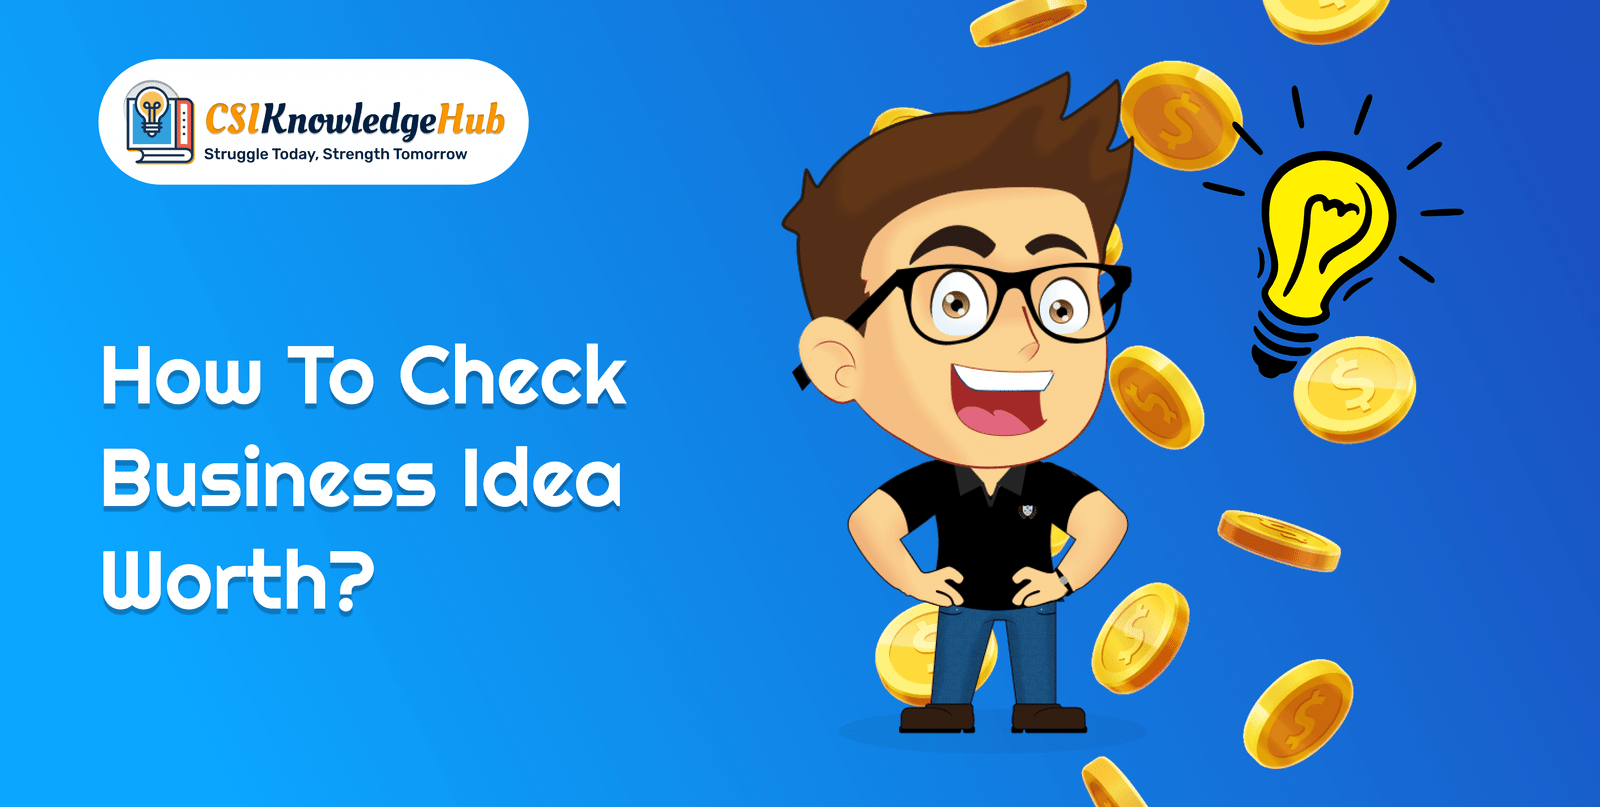 How to Check Business Idea Worth